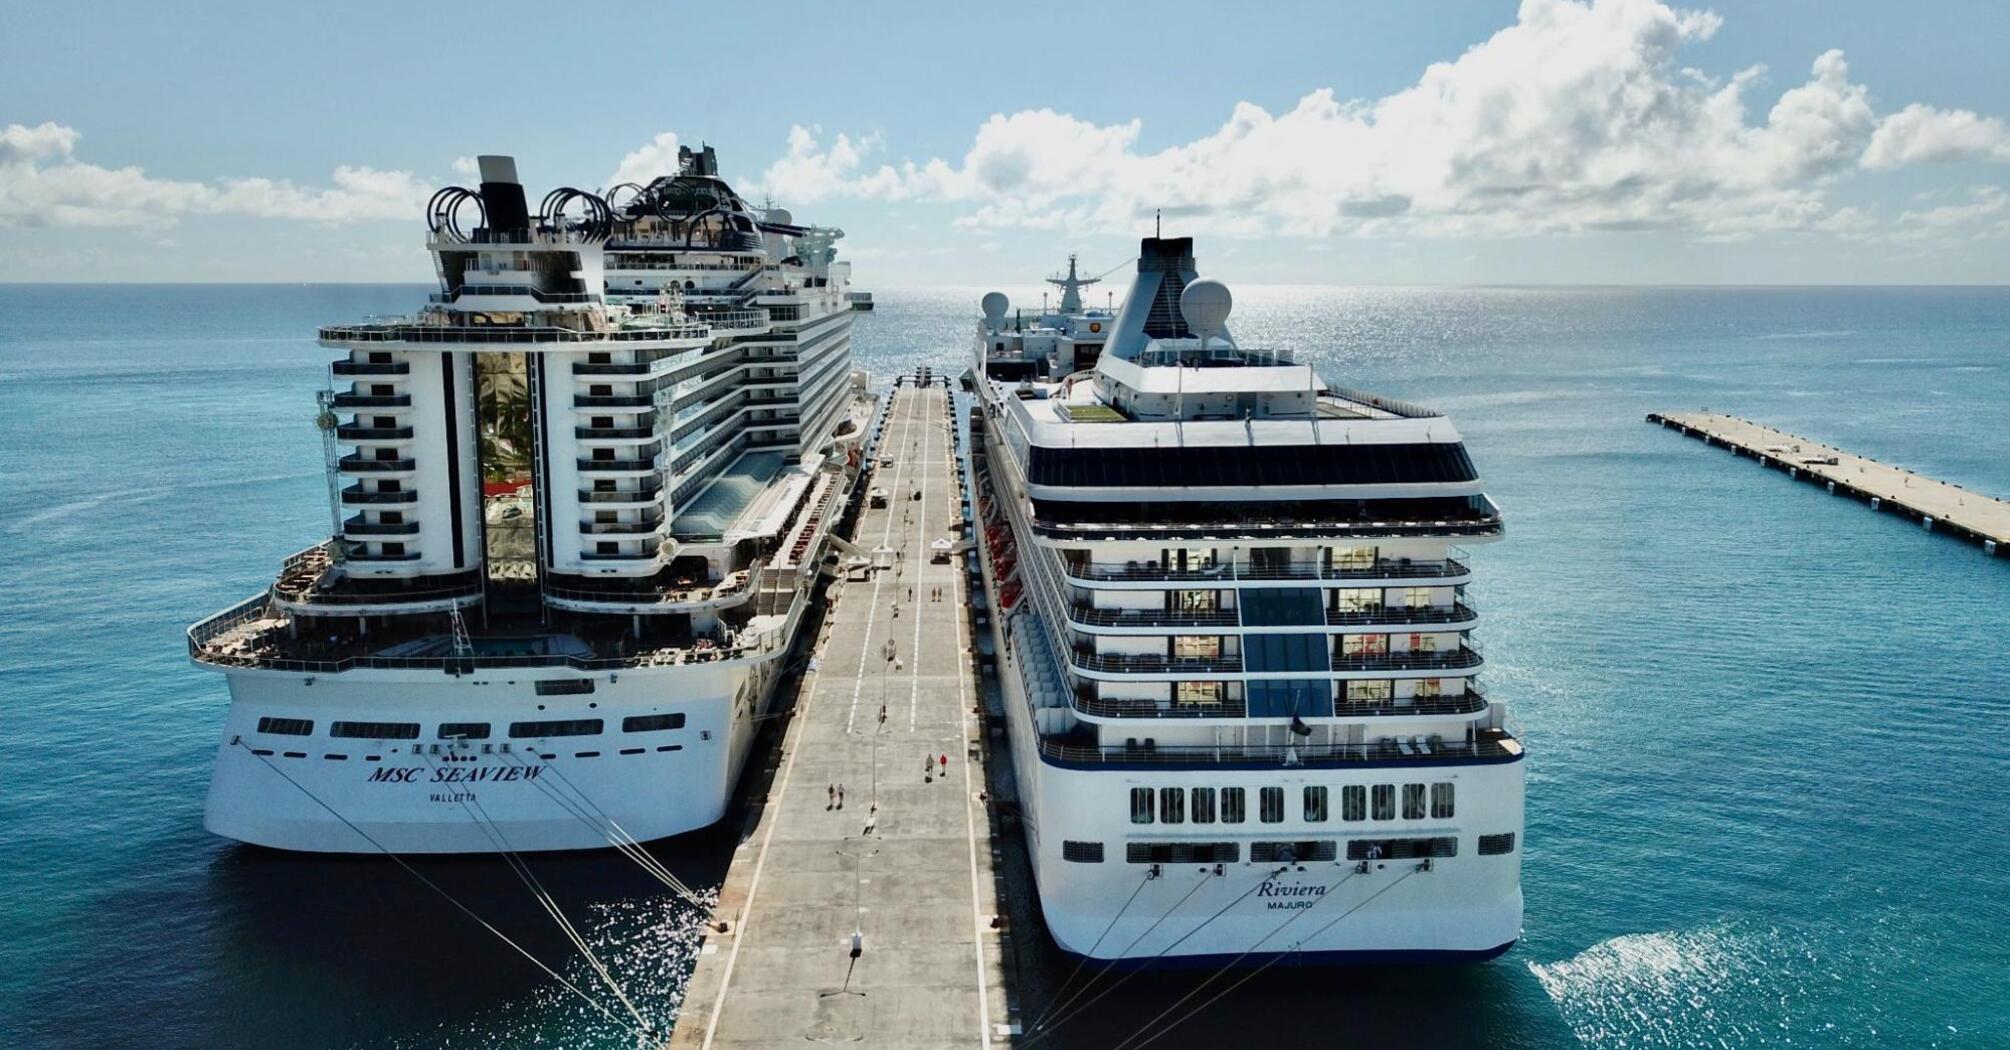 Two cruise ships set off on a long journey